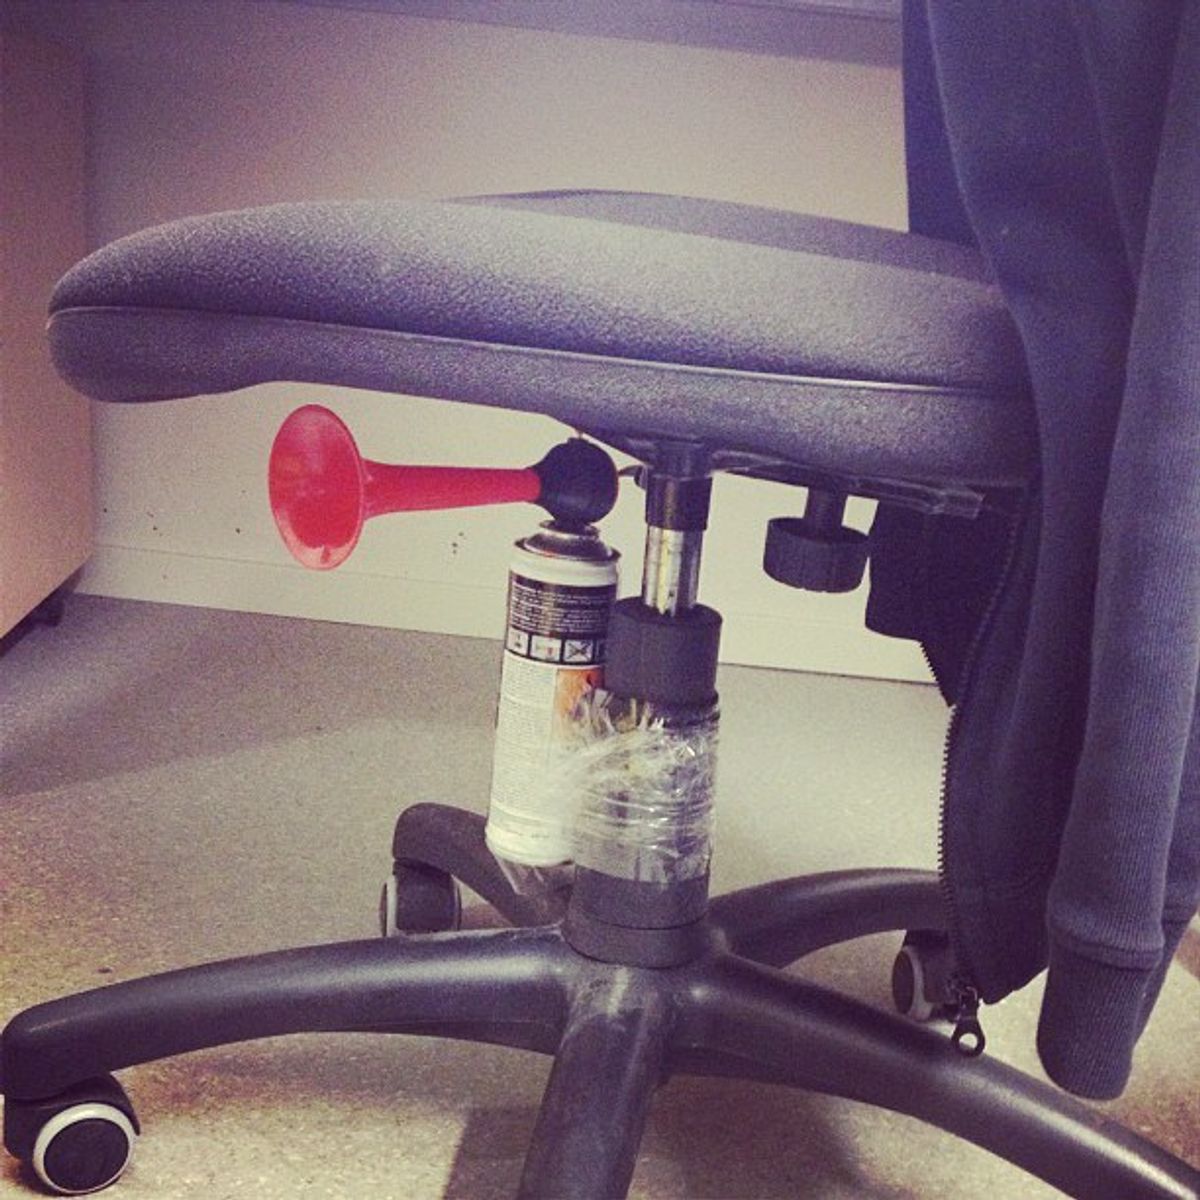 14 Completely Harmless And Super Easy April Fools' Day Pranks